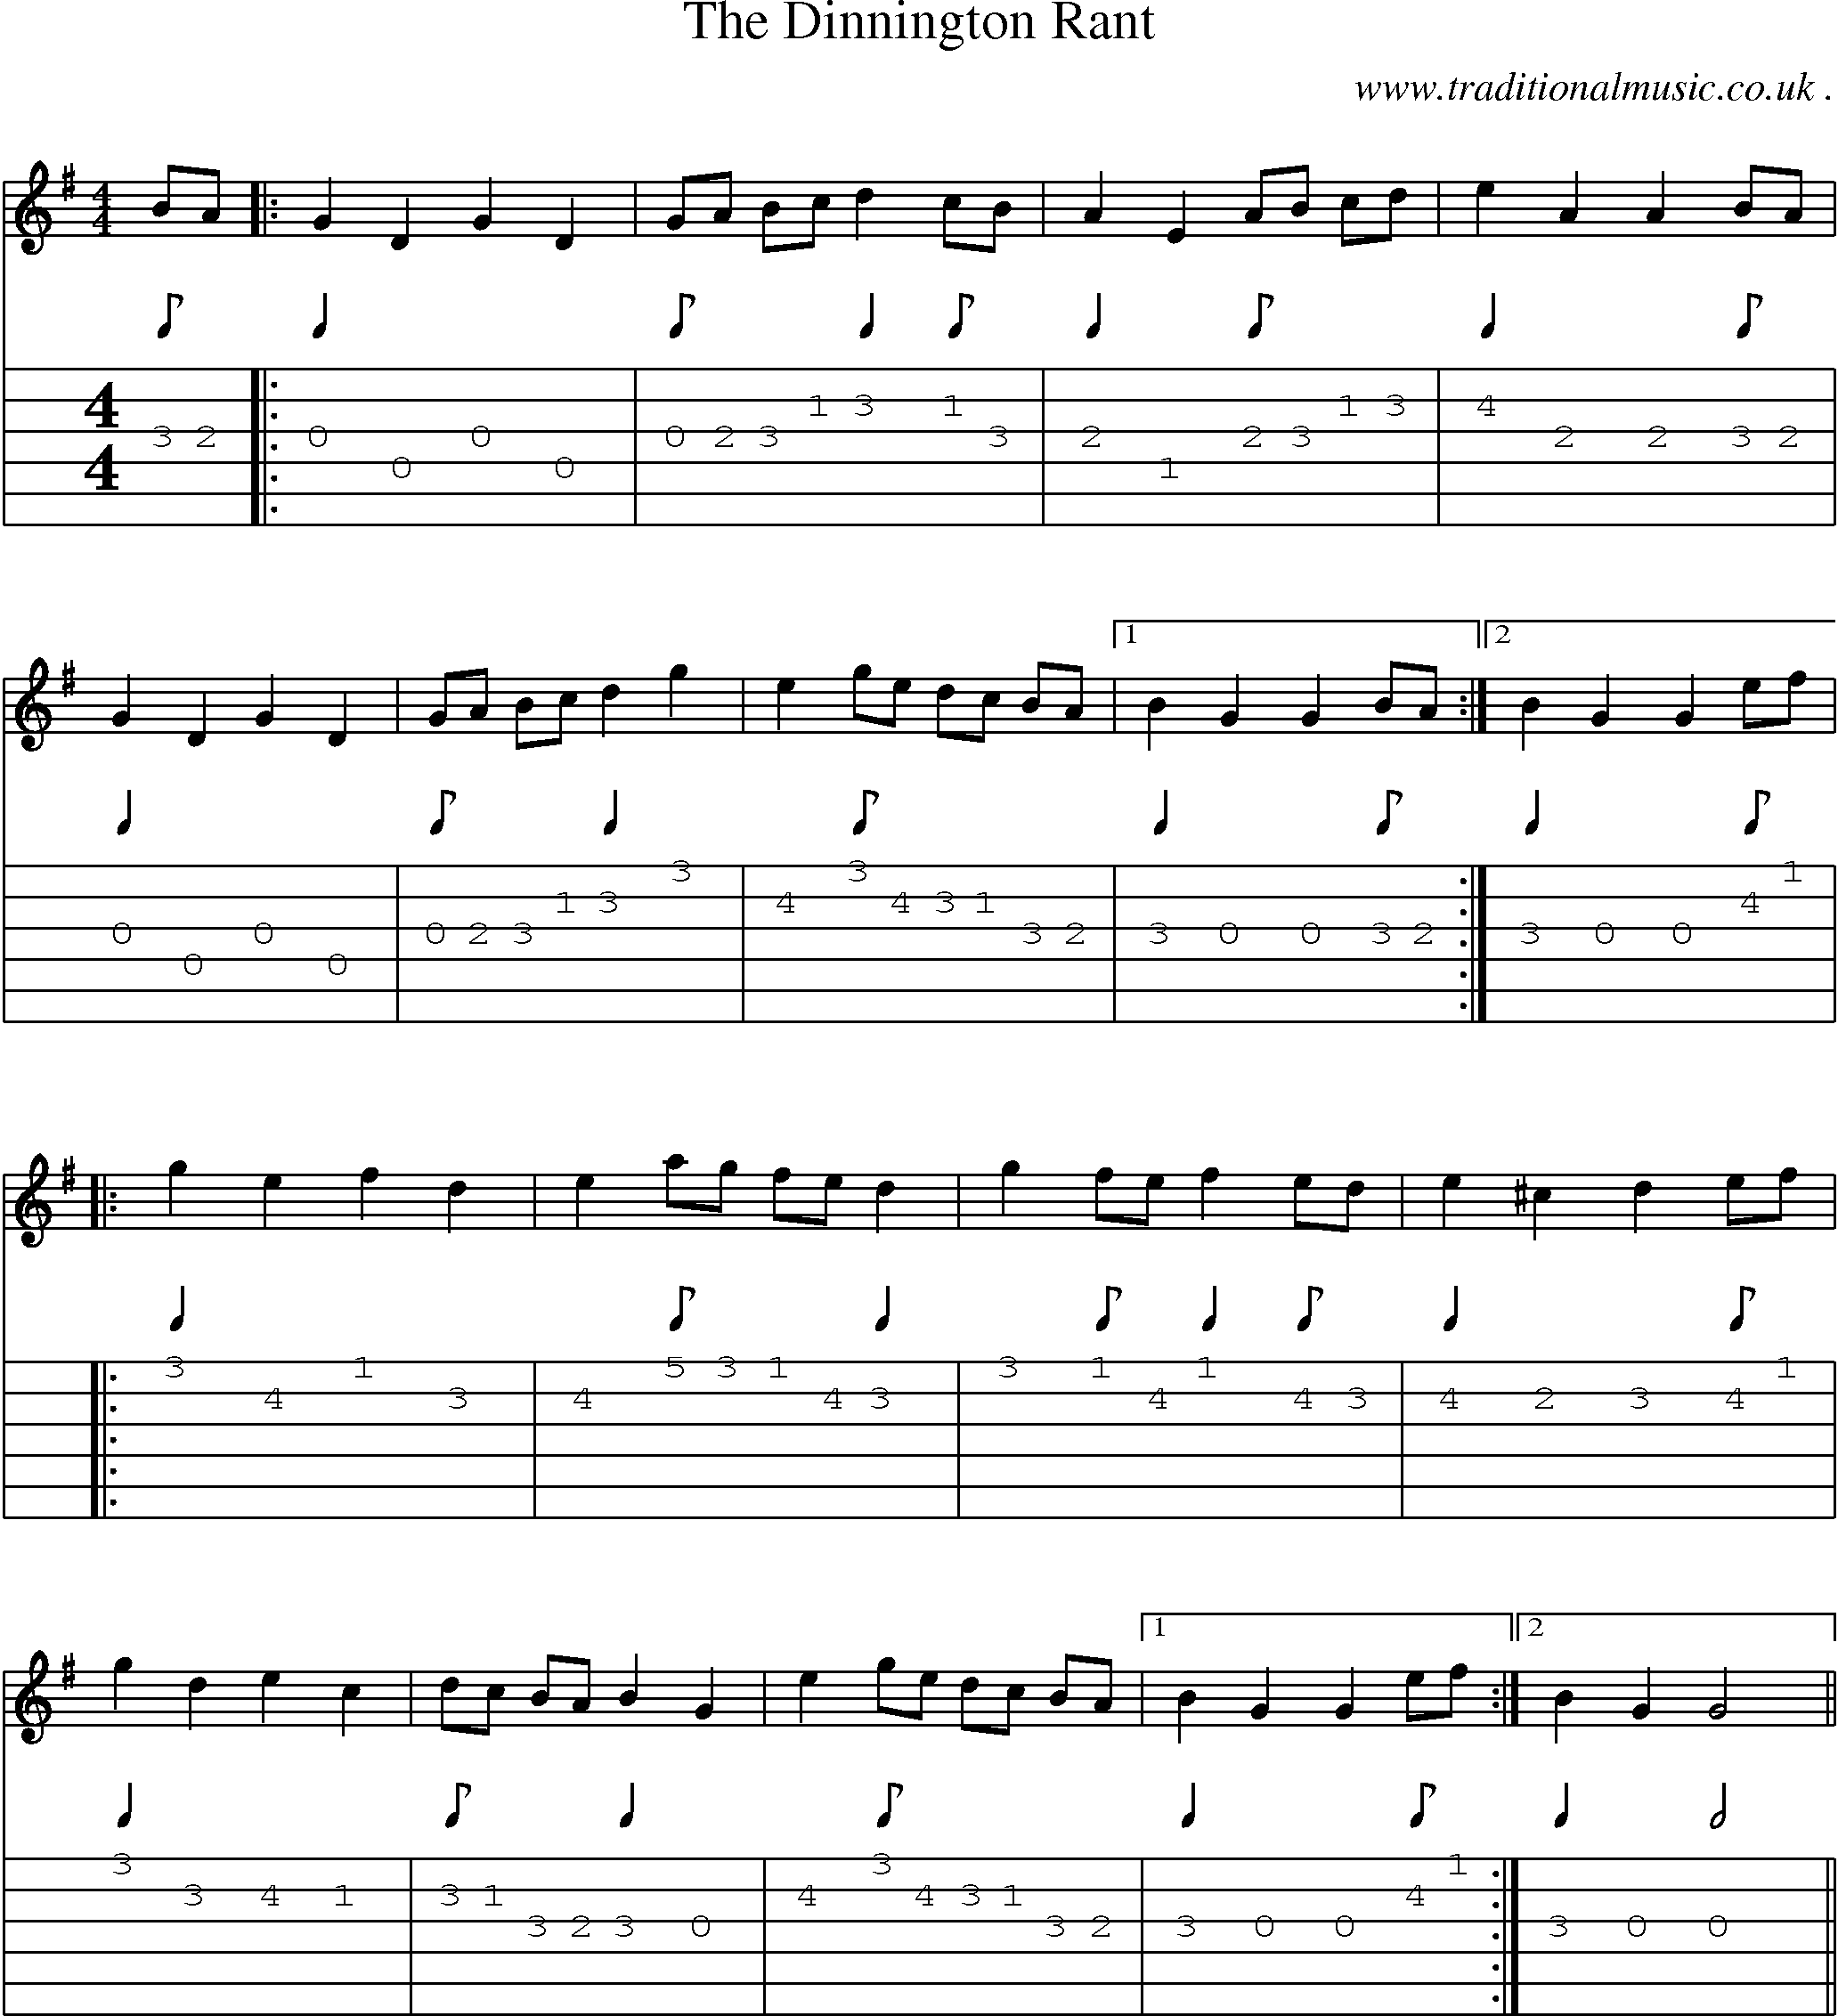 Sheet-Music and Guitar Tabs for The Dinnington Rant